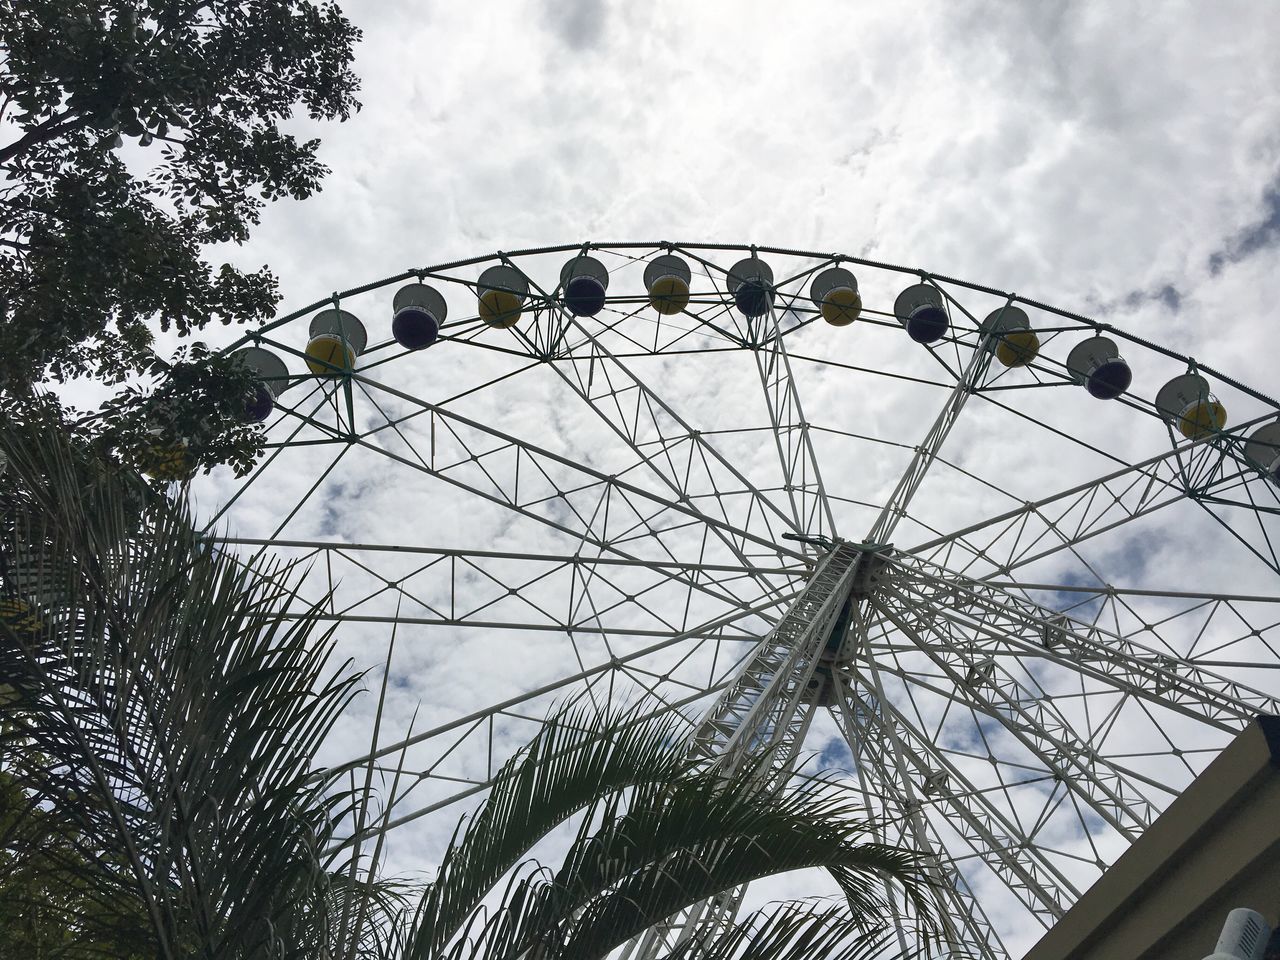 LOW ANGLE VIEW OF FERRIS WHEEL BY TREE AGAINST SKY